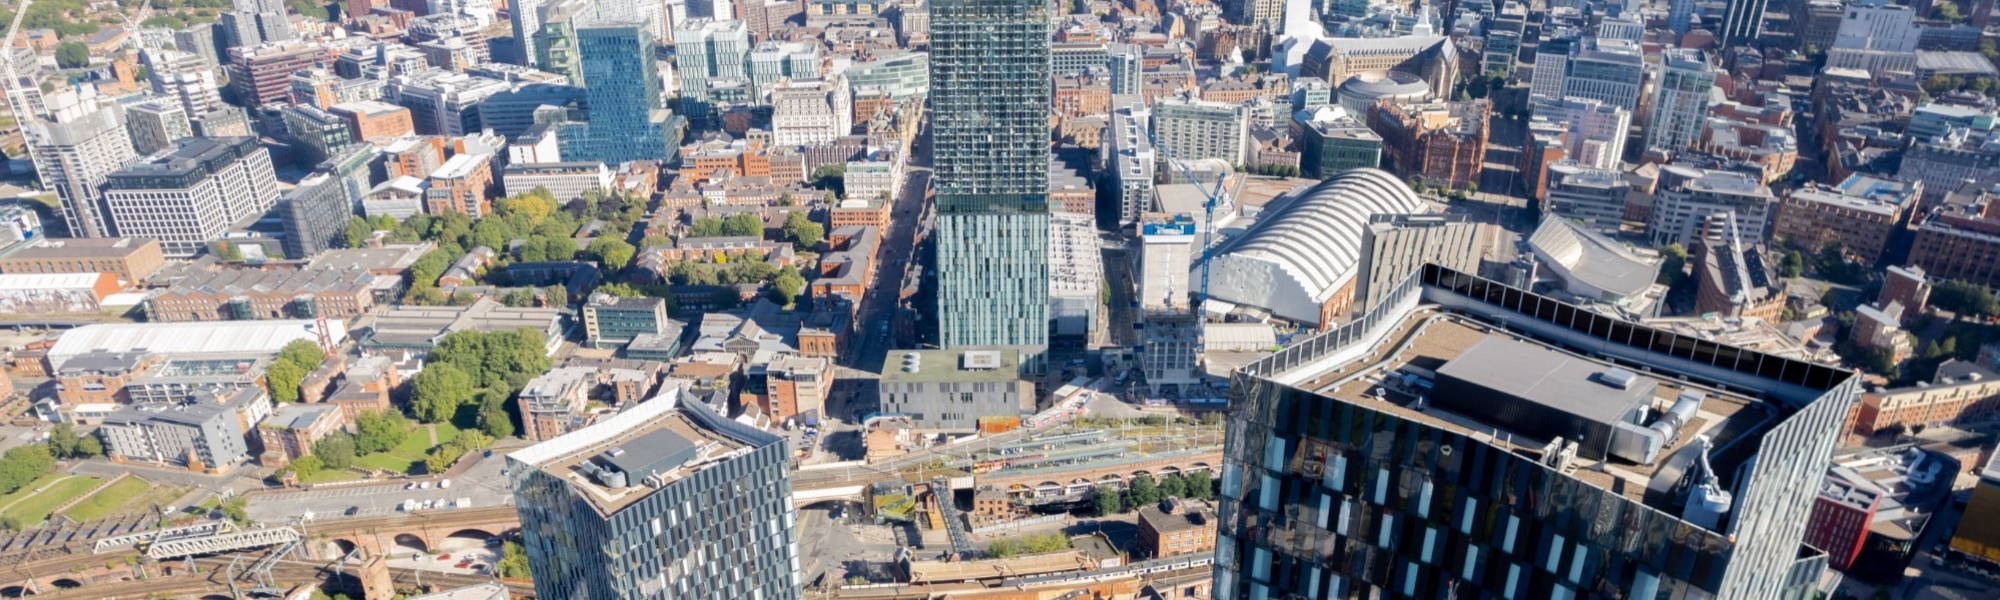 Manchester City Centre Drone Aerial View Above Building Work Skyline Construction Blue Sky Summer Beetham Tower Deansgate Square Glass Towers.